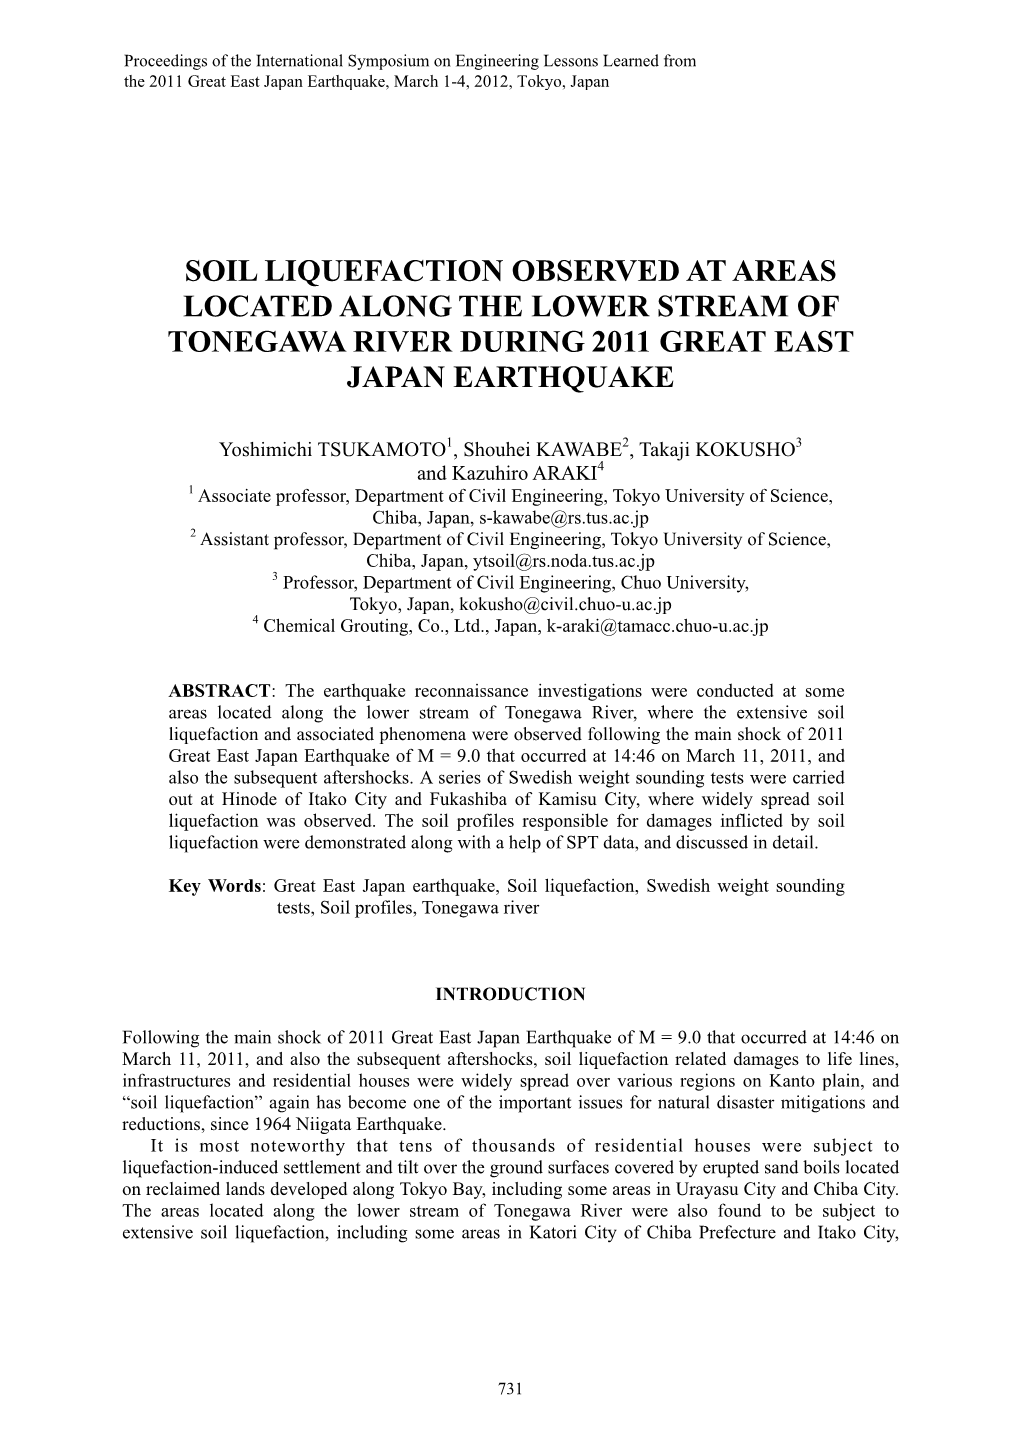 Soil Liquefaction Observed at Areas Located Along the Lower Stream of Tonegawa River During 2011 Great East Japan Earthquake